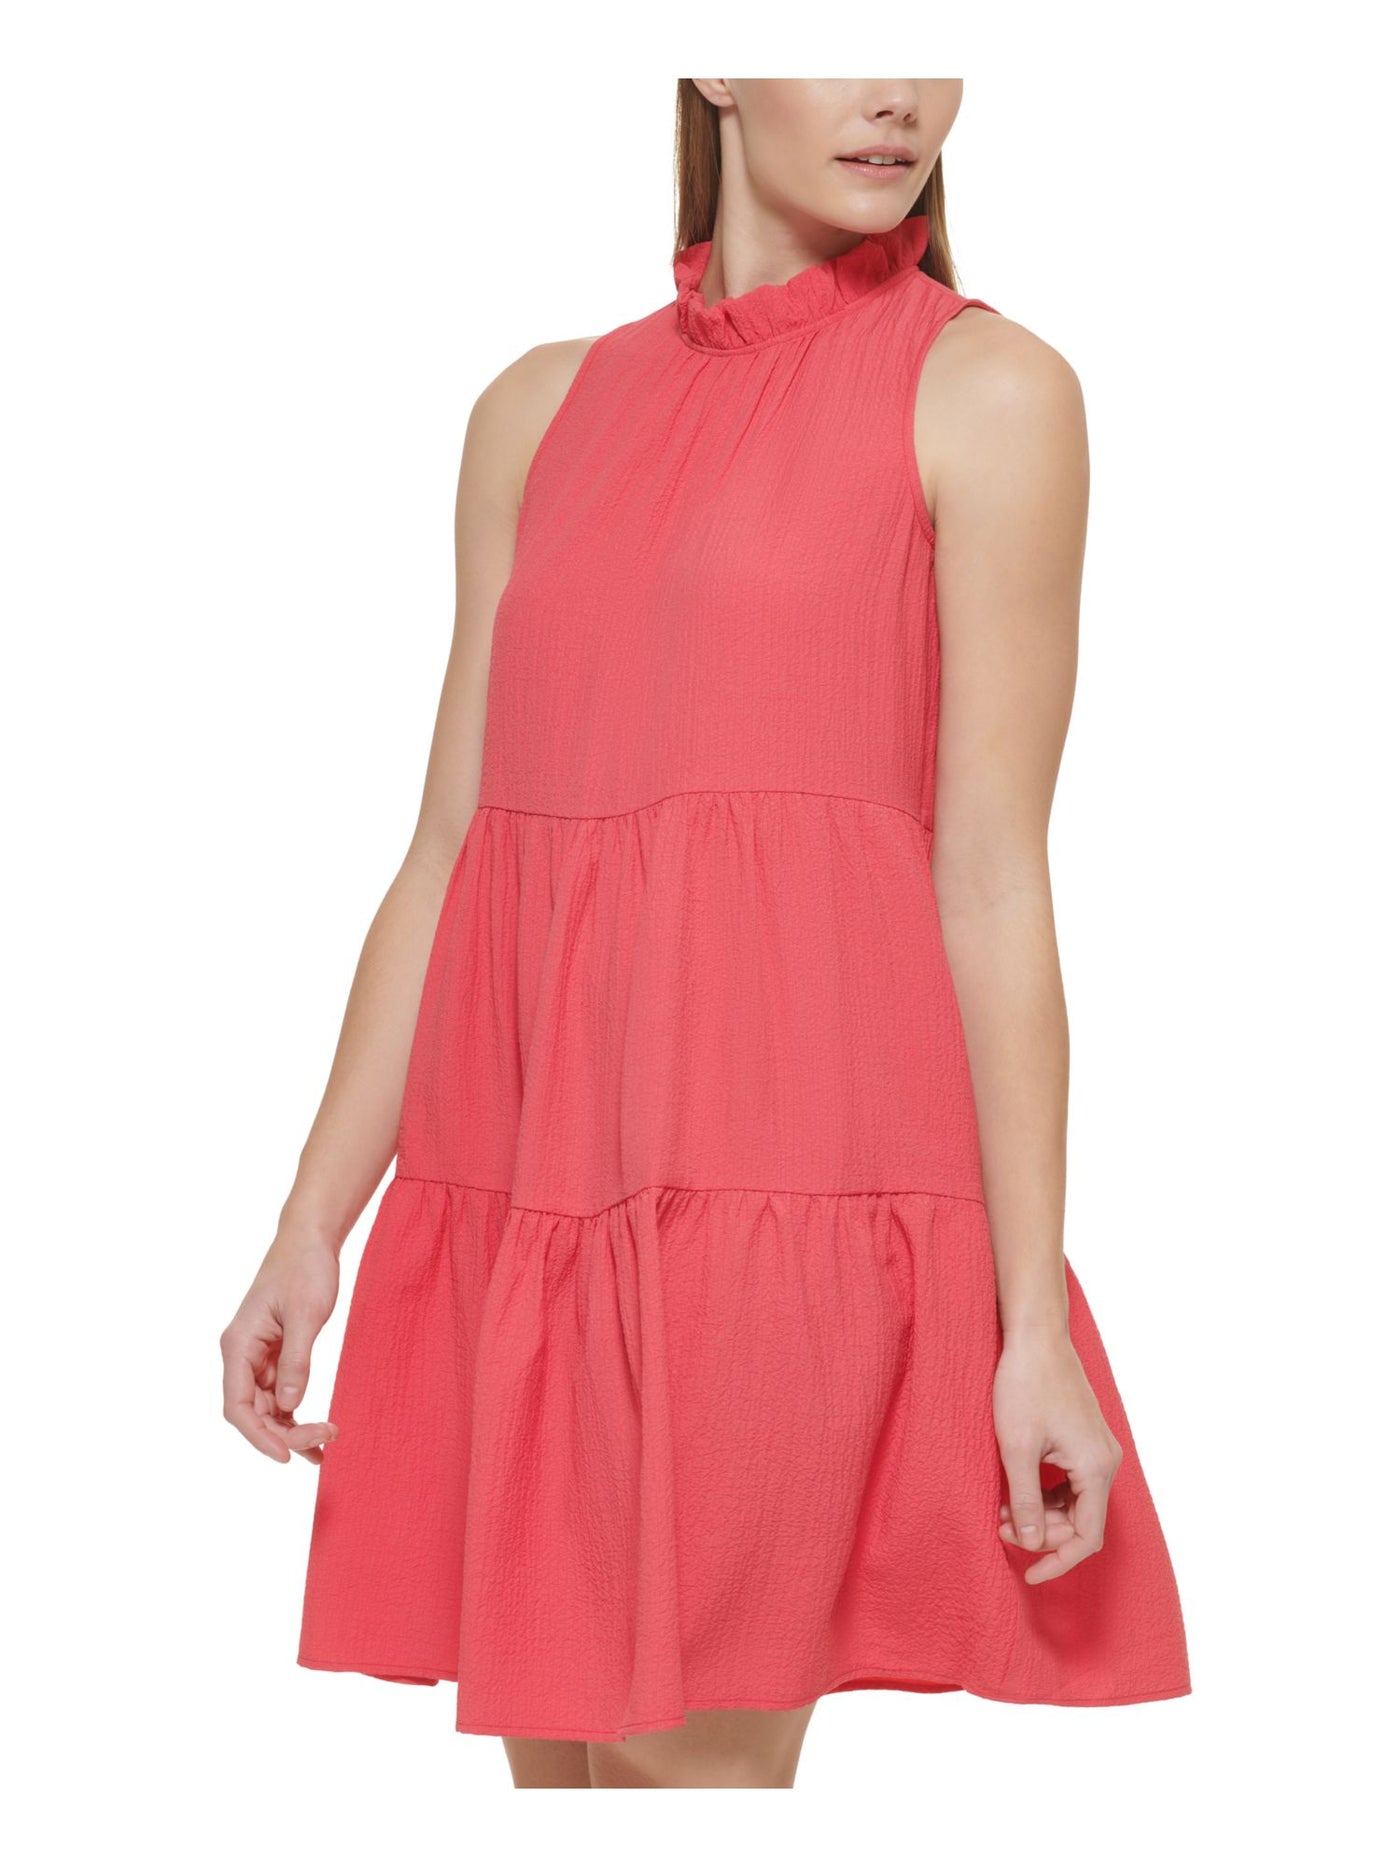 CALVIN KLEIN Womens Pink Pocketed Ruffled Back Button Keyhole Tiered Sleeveless Mock Neck Above The Knee A-Line Dress 6